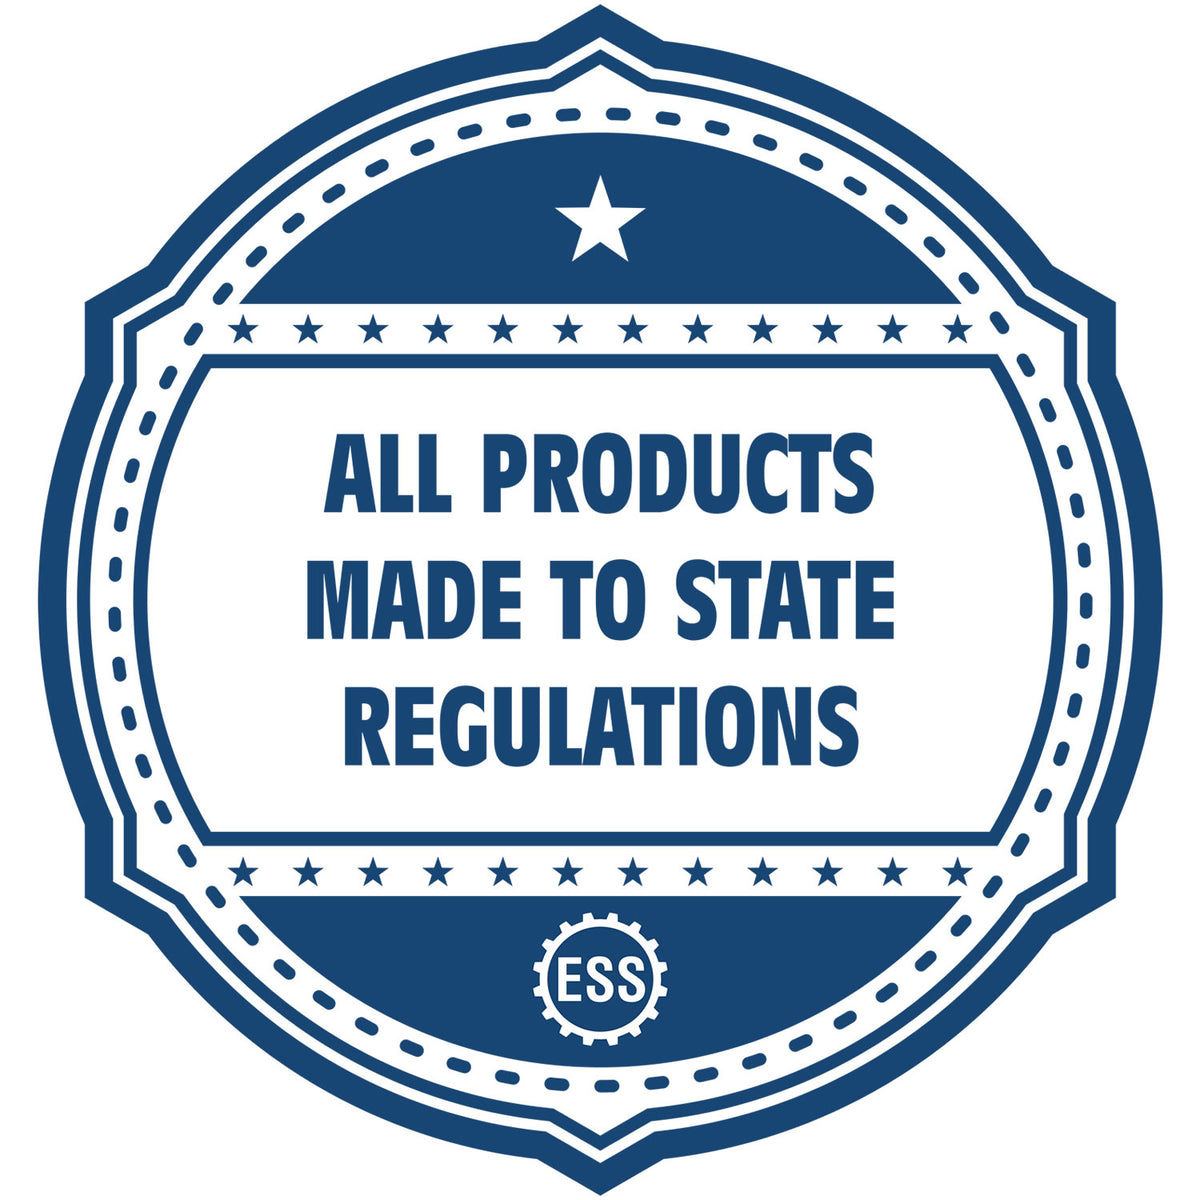 An icon or badge element for the Heavy Duty Cast Iron Texas Engineer Seal Embosser showing that this product is made in compliance with state regulations.